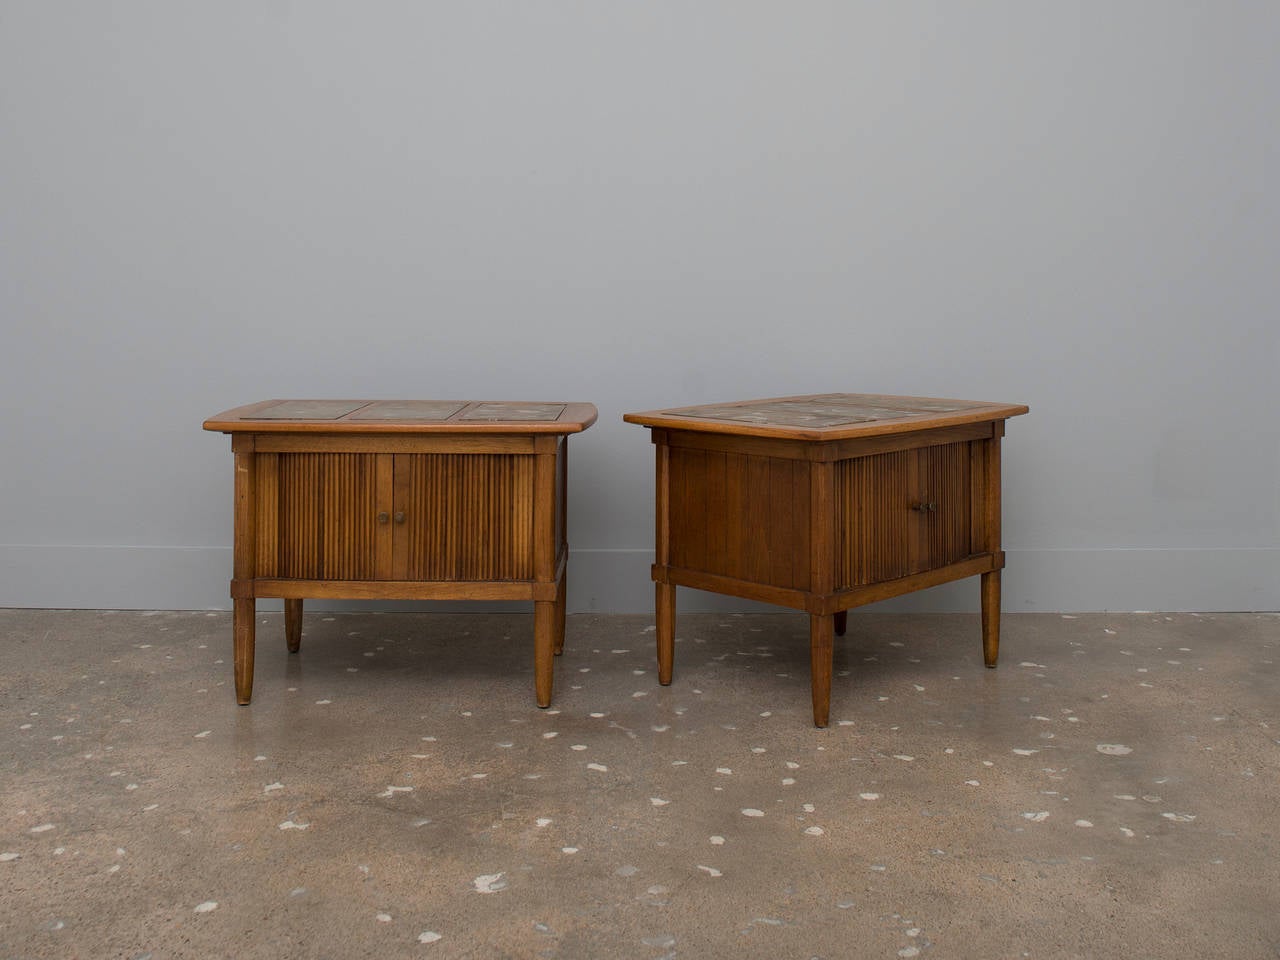 American Walnut and Granite Side Tables with Tambour Doors